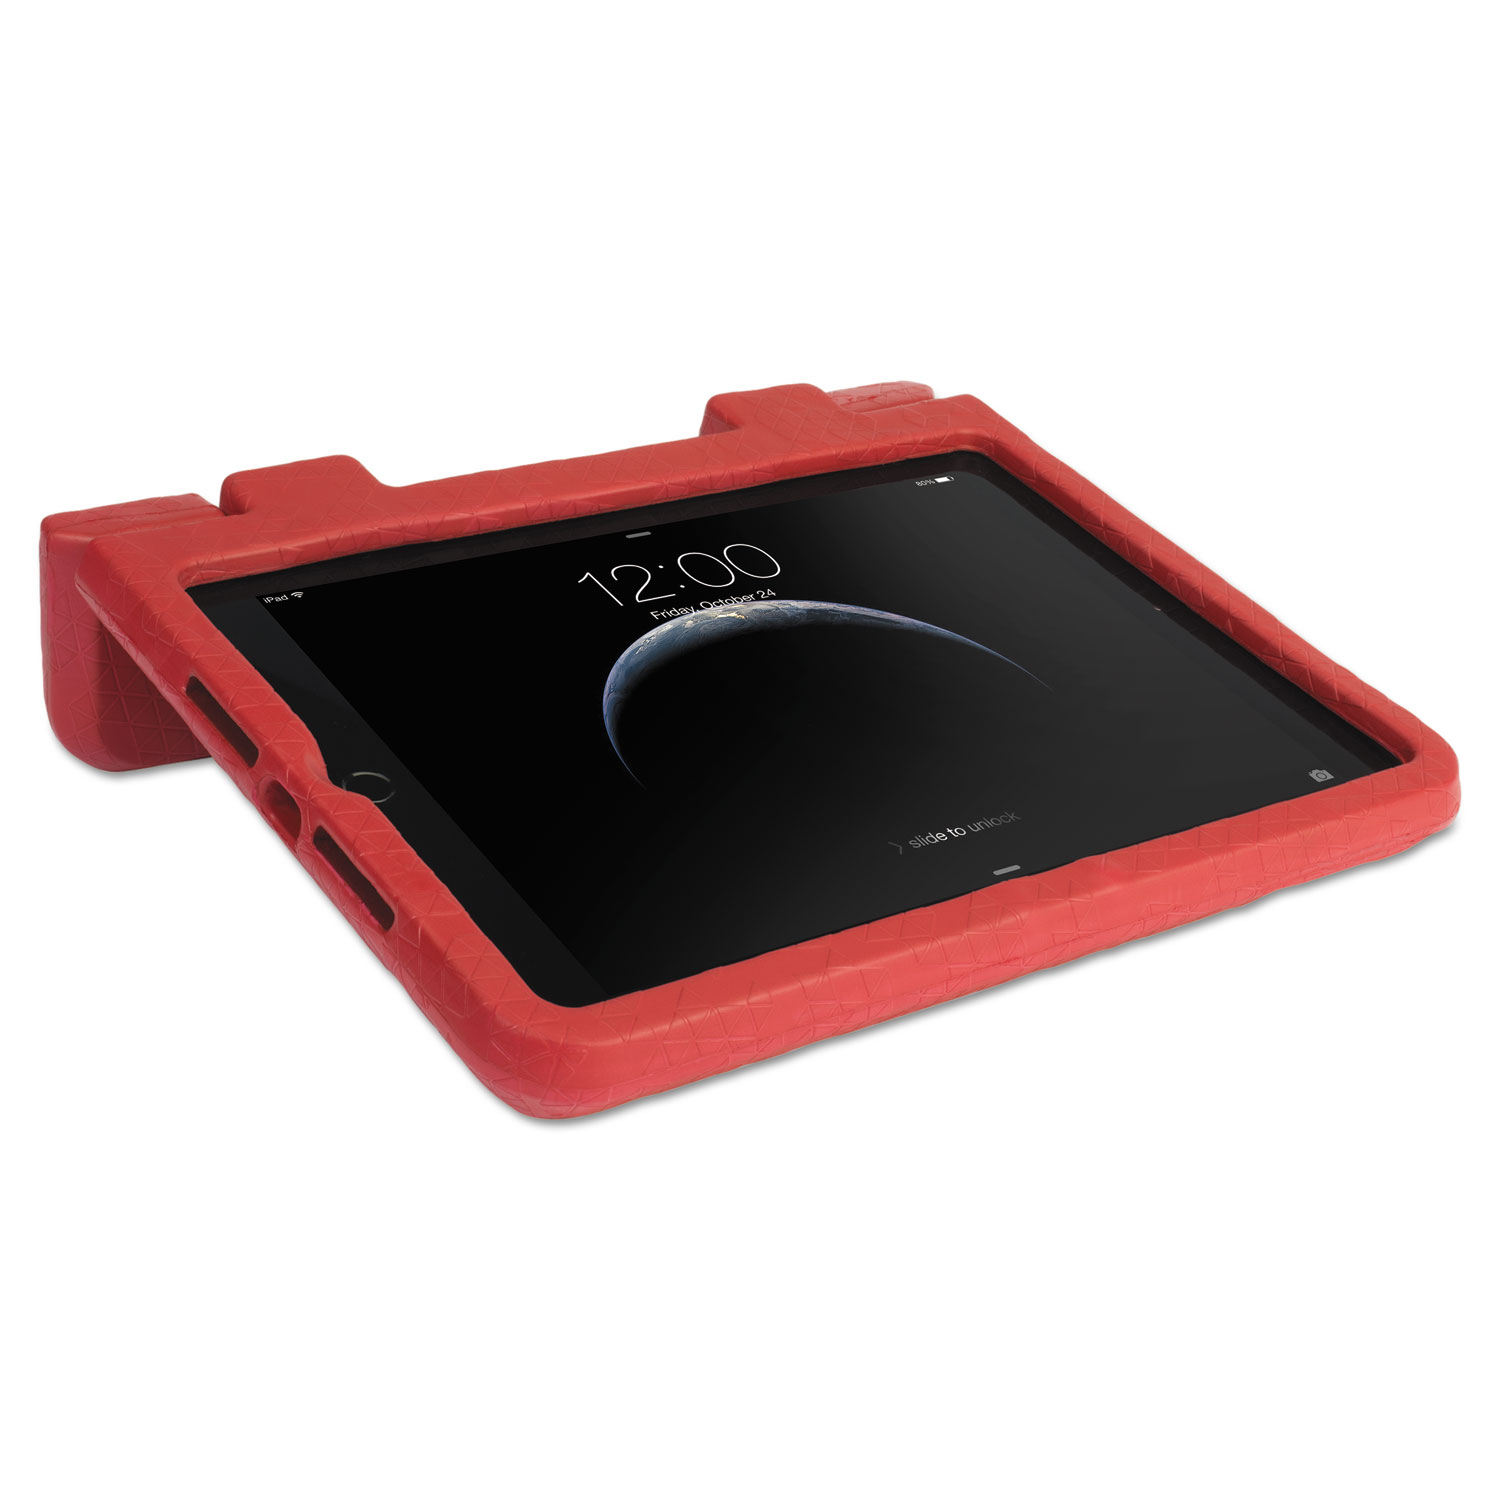 SafeGrip Rugged Case for iPad Air, Red